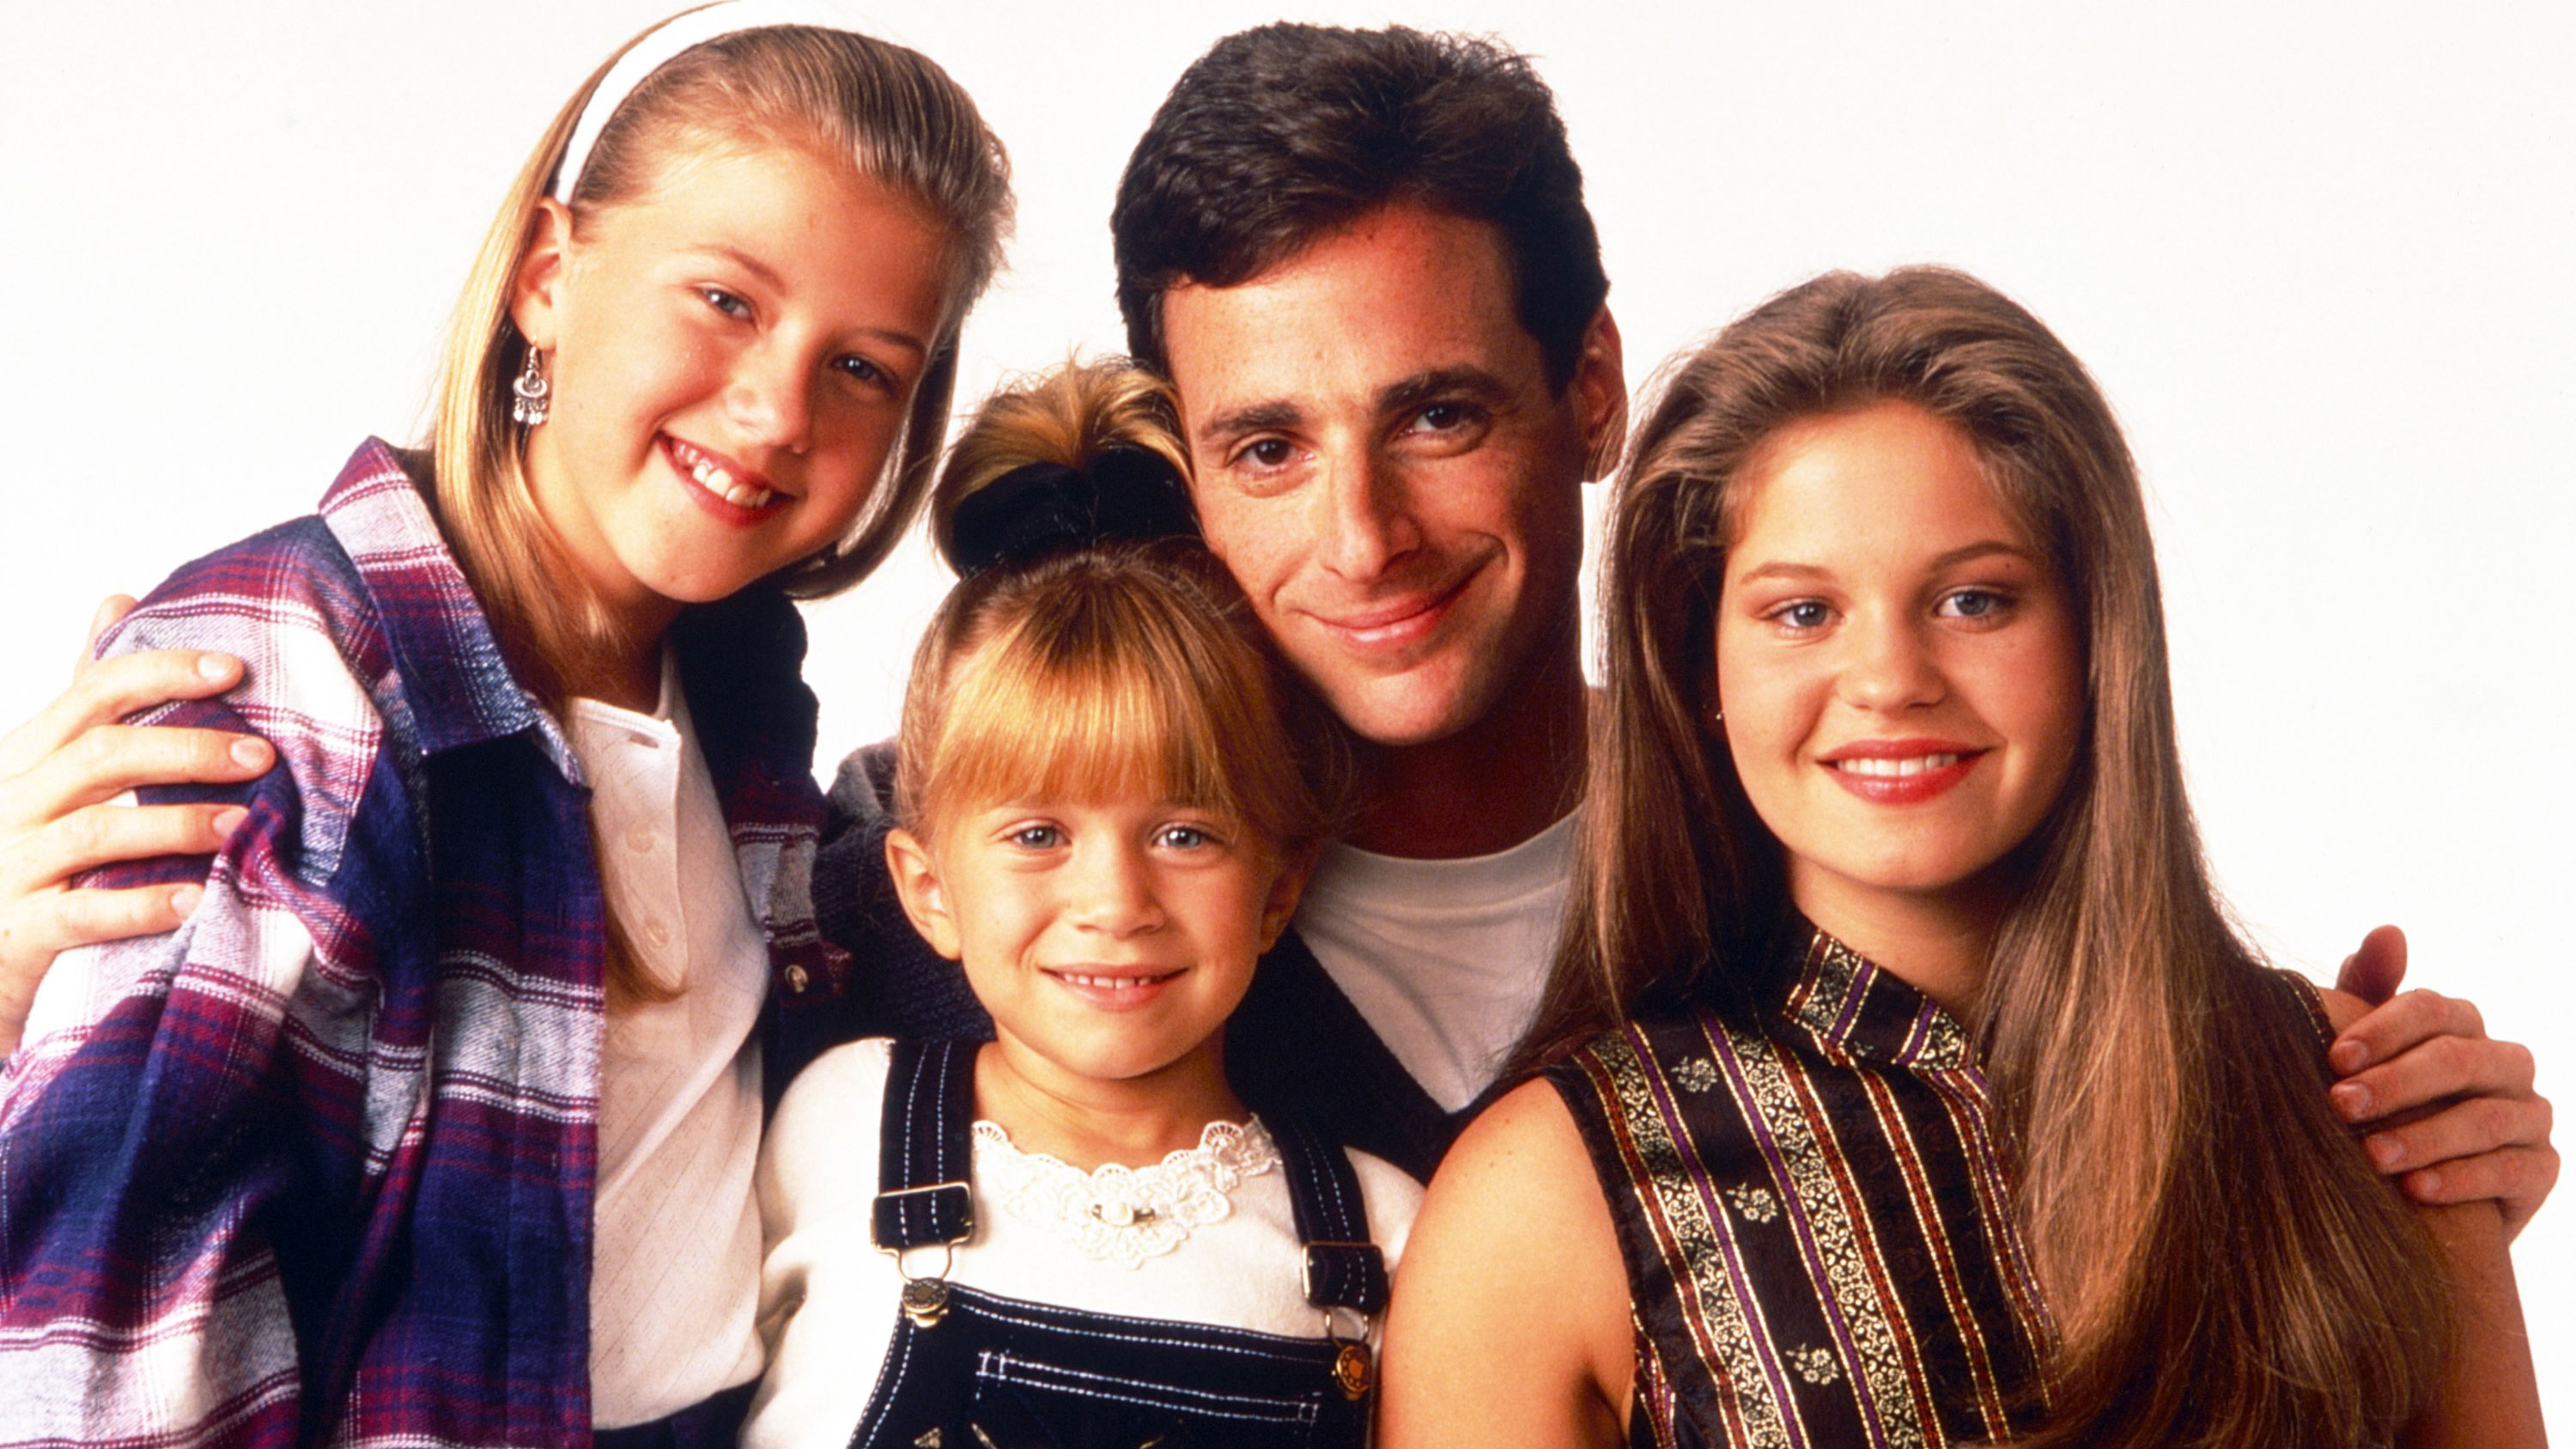 Left to right: Jodie Sweetin, Mary-Kate Olsen, Bob Saget, and Candace Cameron Bure pose for a promotional photo for the TV show Full House in 1993.